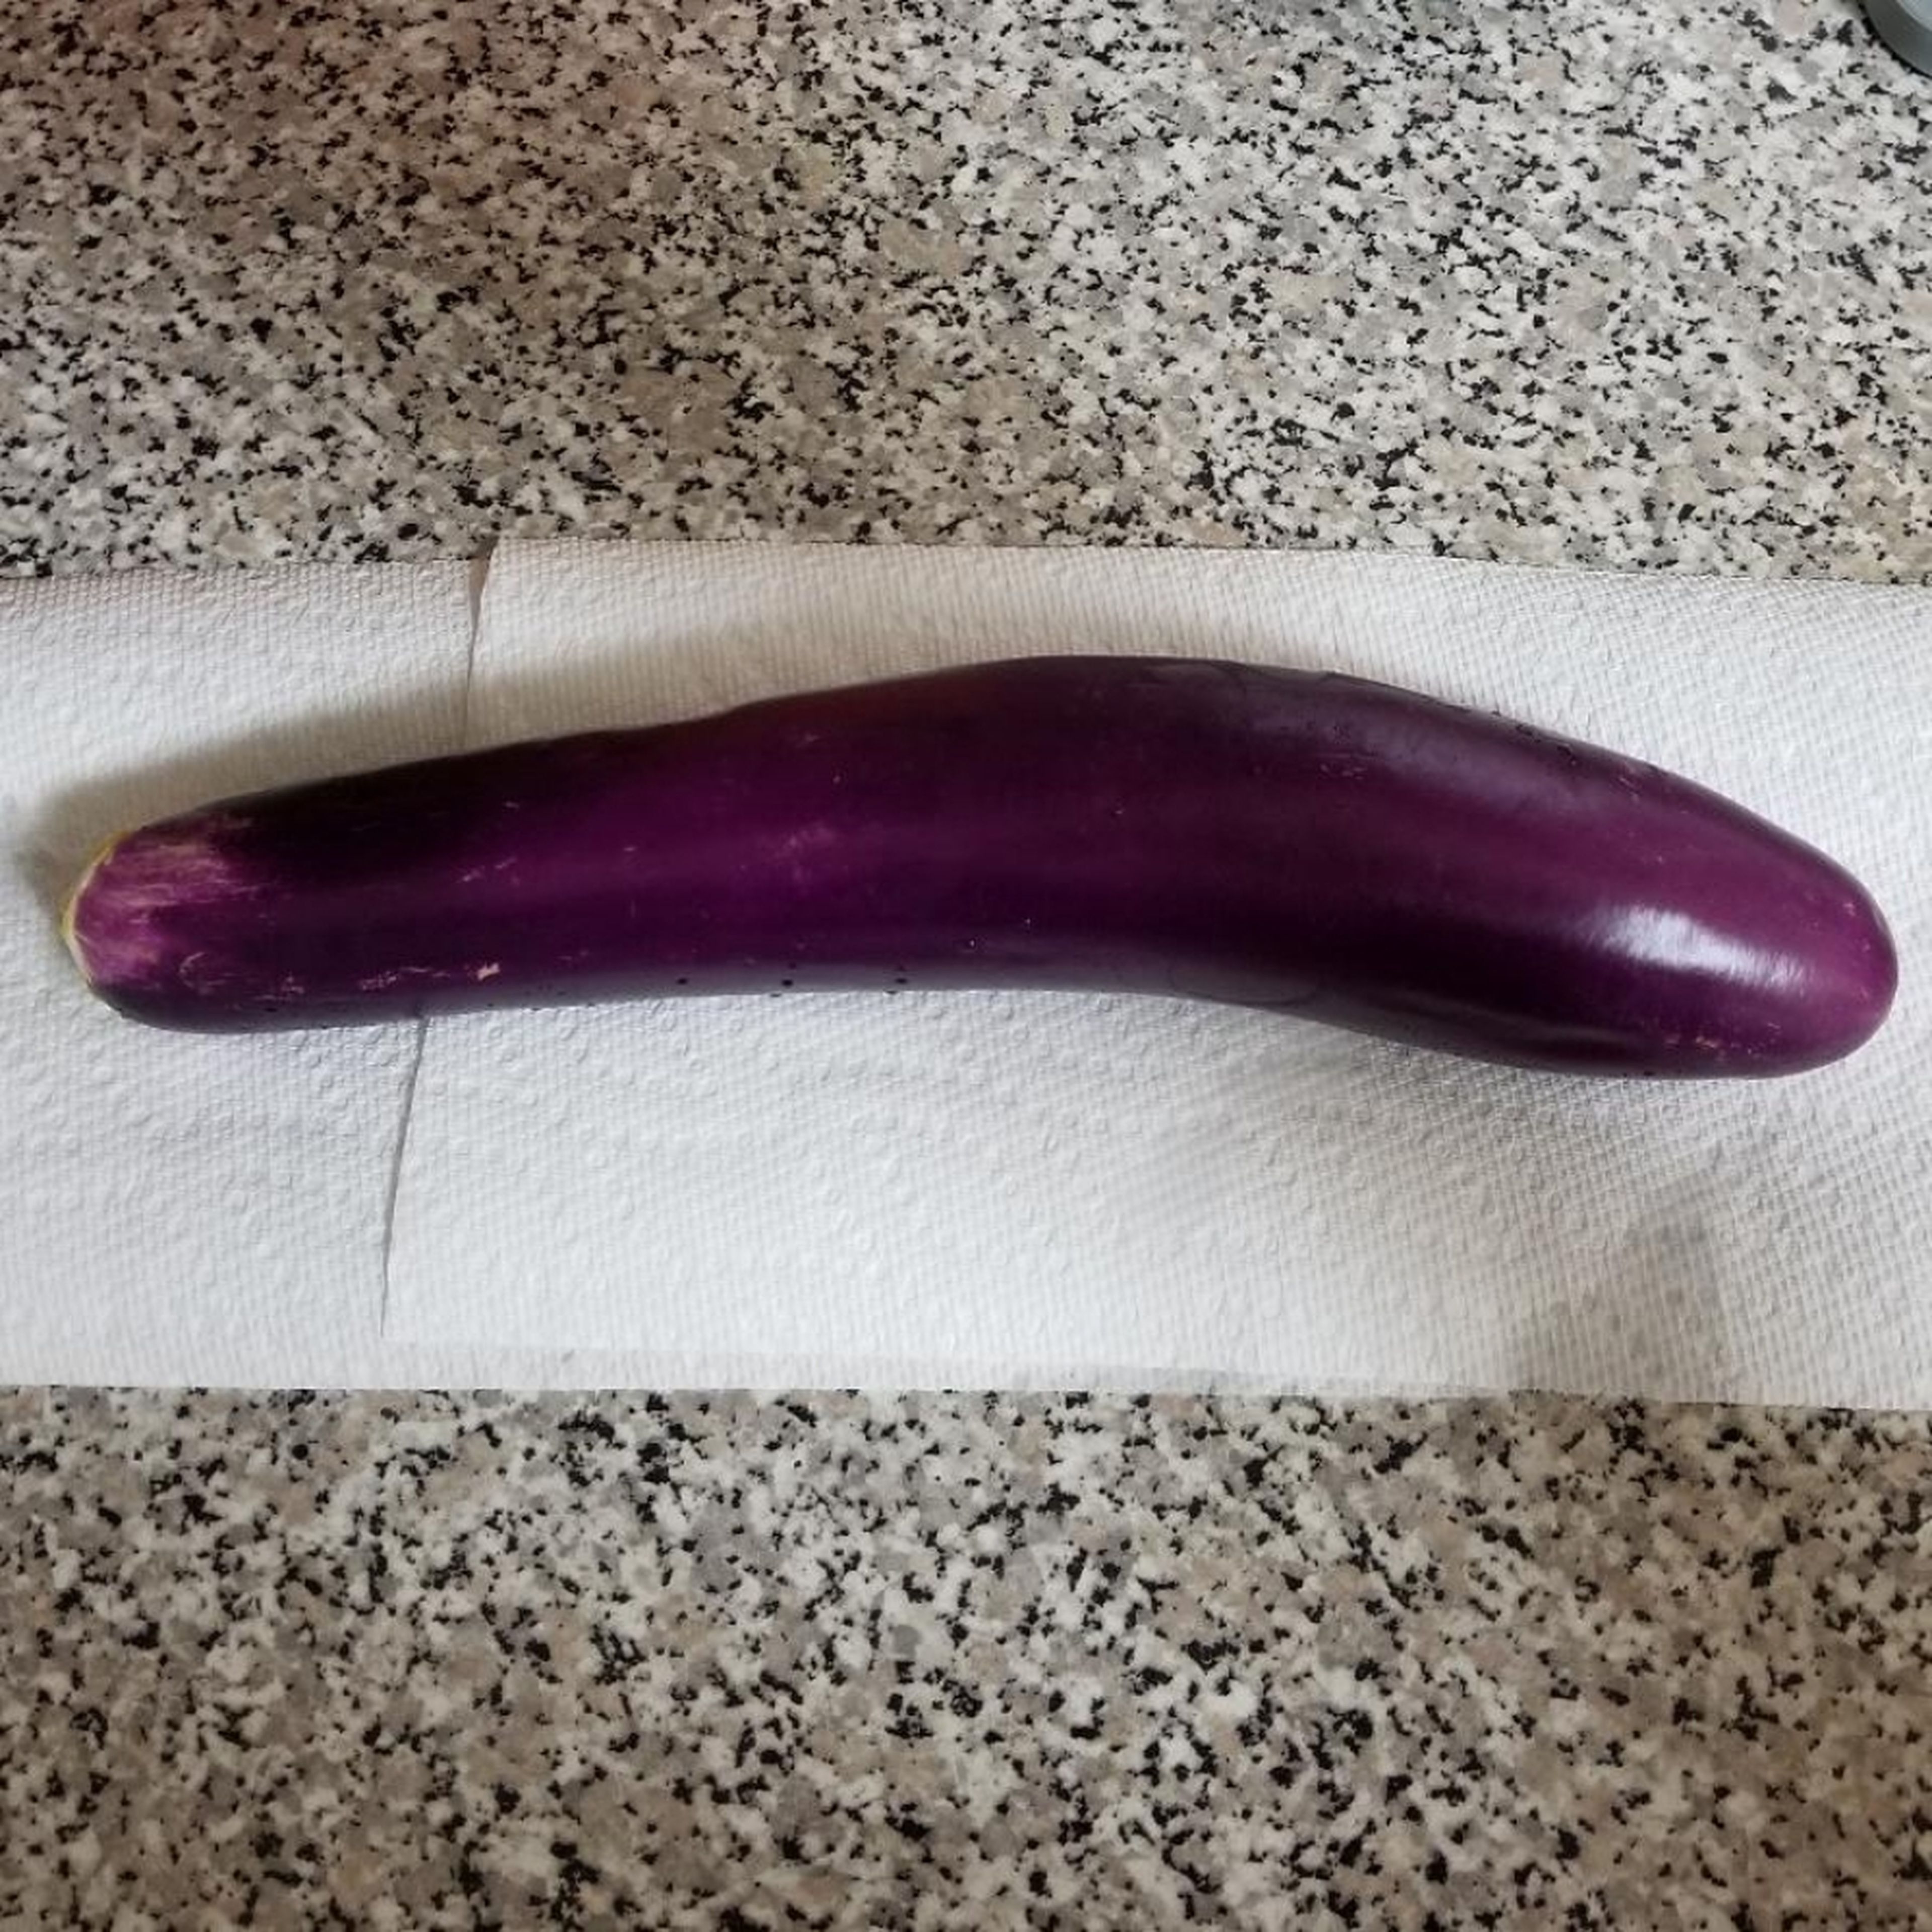 Any eggplant will work, but I generally prefer the long Japanese-style eggplants.